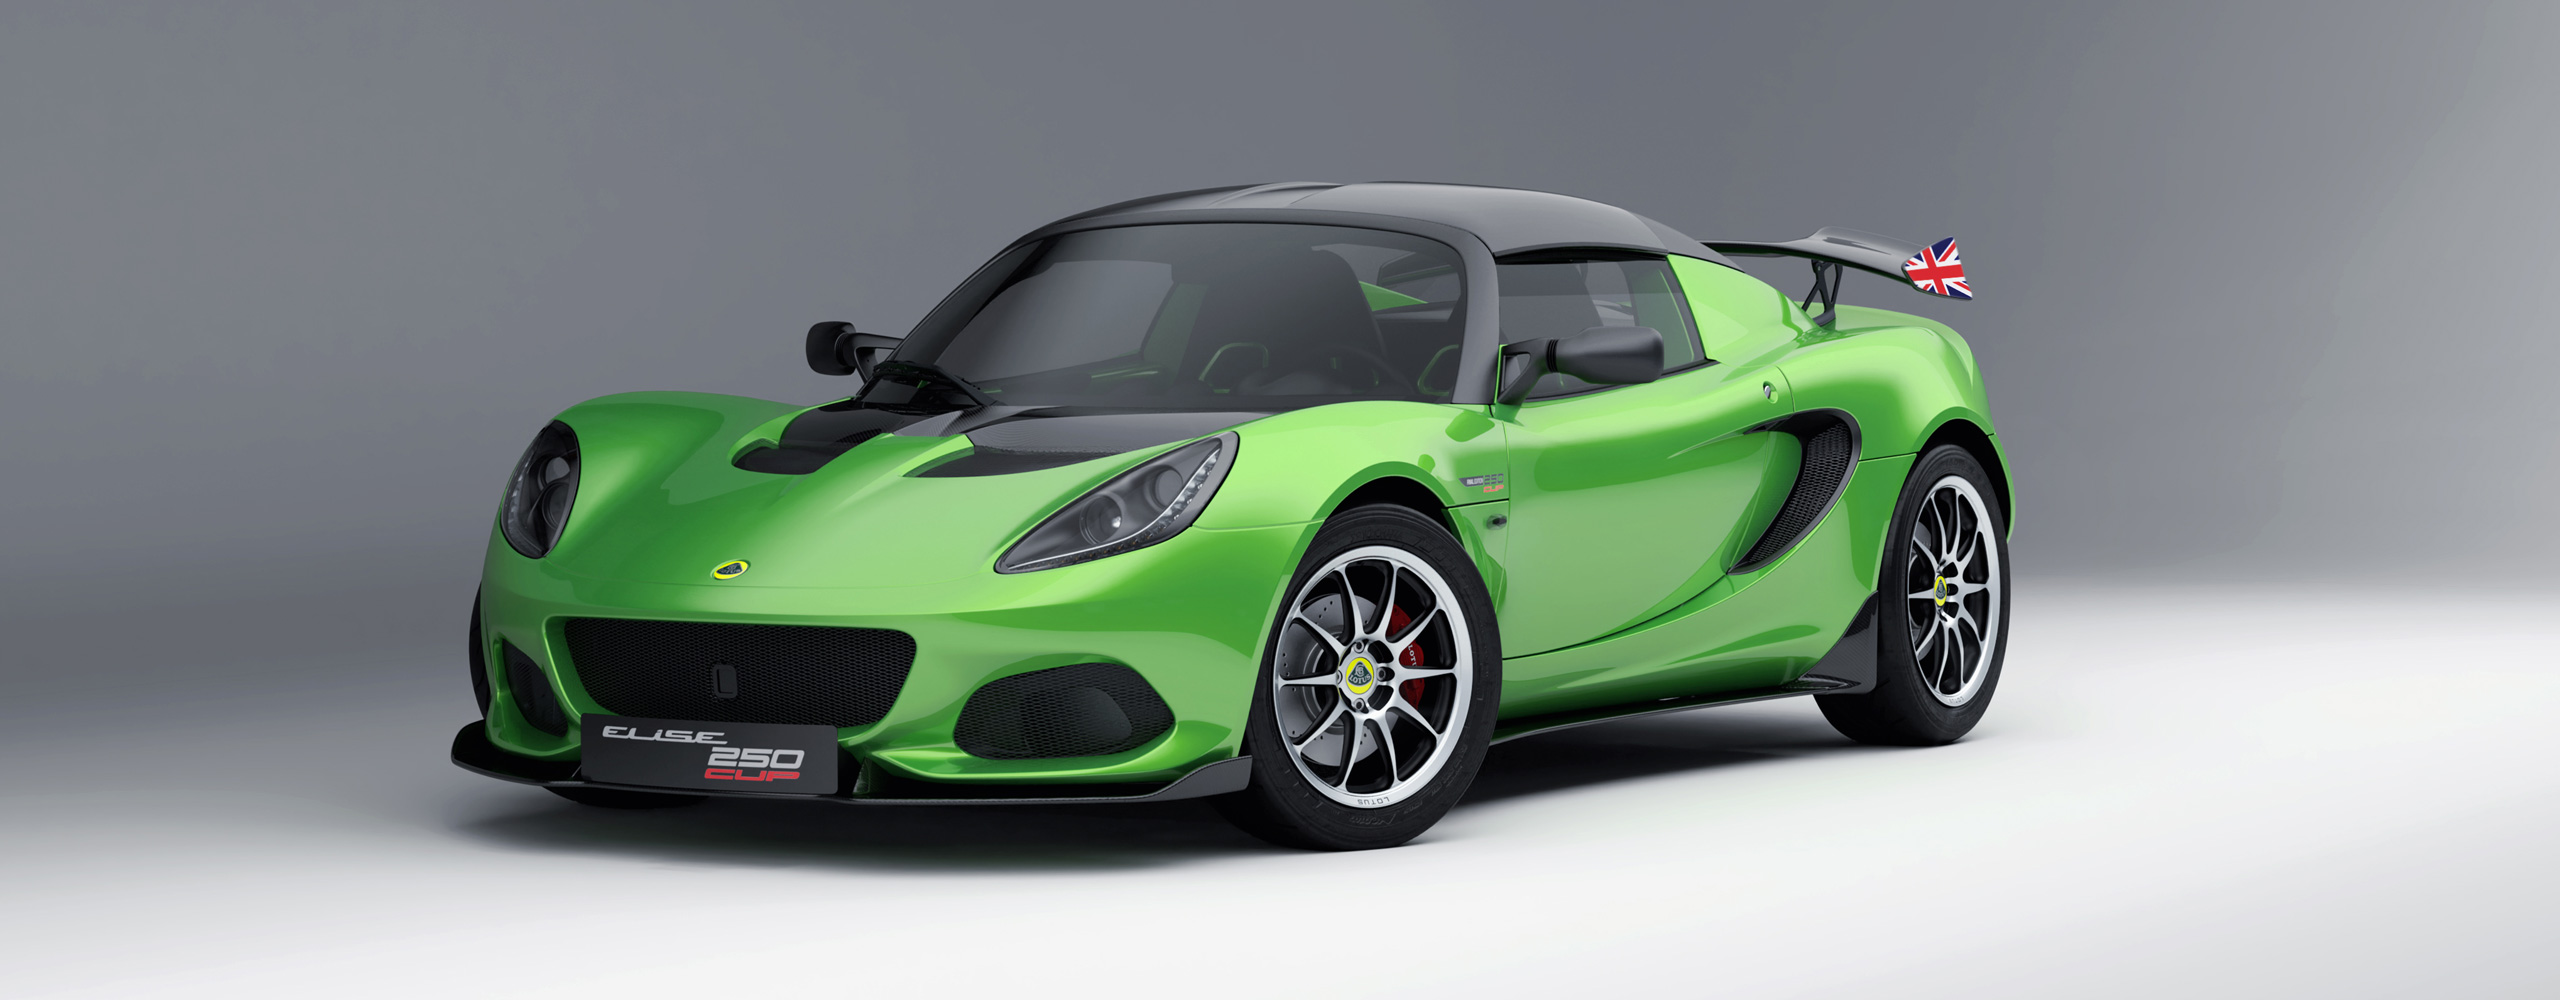 REQUEST : looking for a 3D car model ( Lotus Elise 2016 250 cup edition )